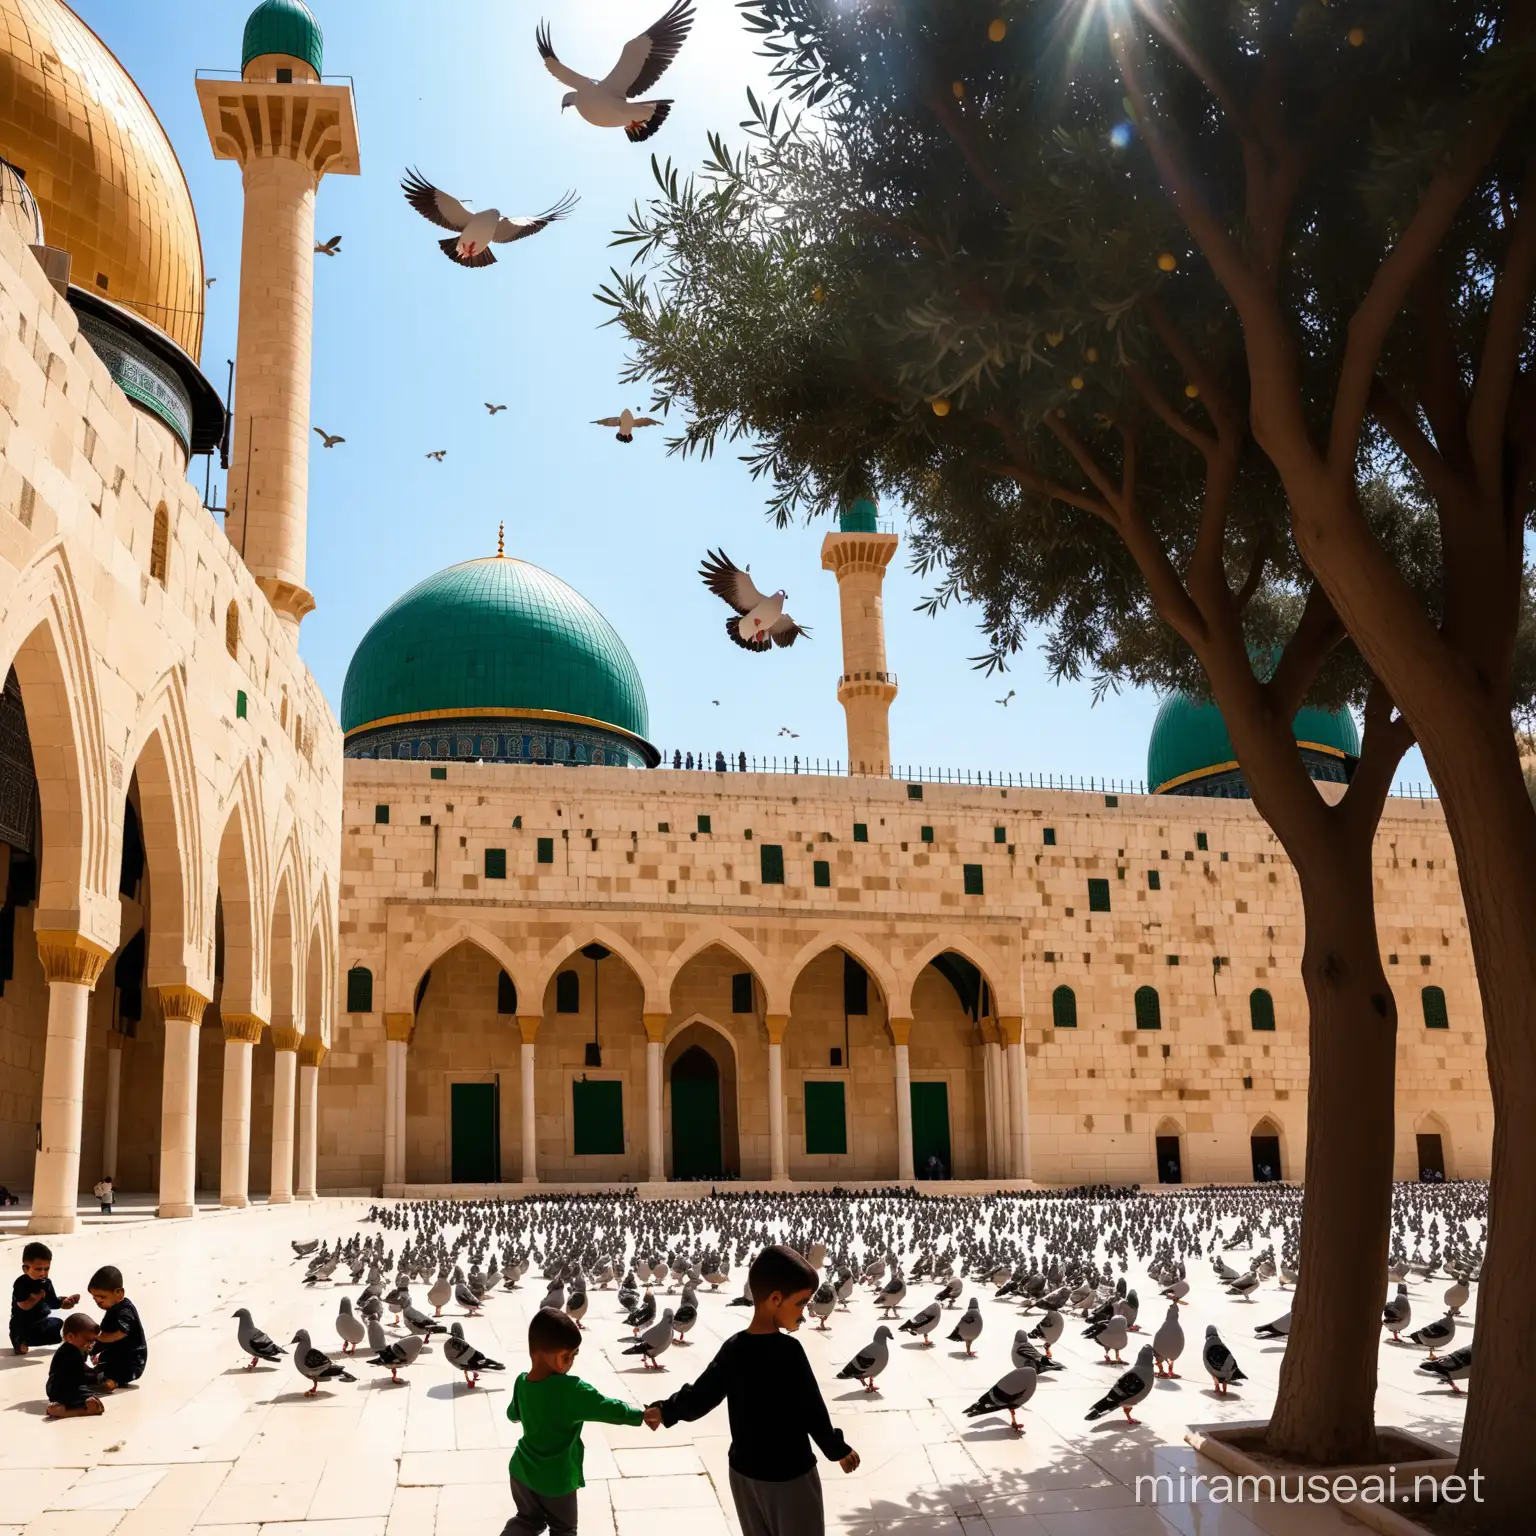 Many children of Gaza are in Al-Aqsa mosque with happiness playing.
Atmosphere heavenly, pigeons, olive trees.